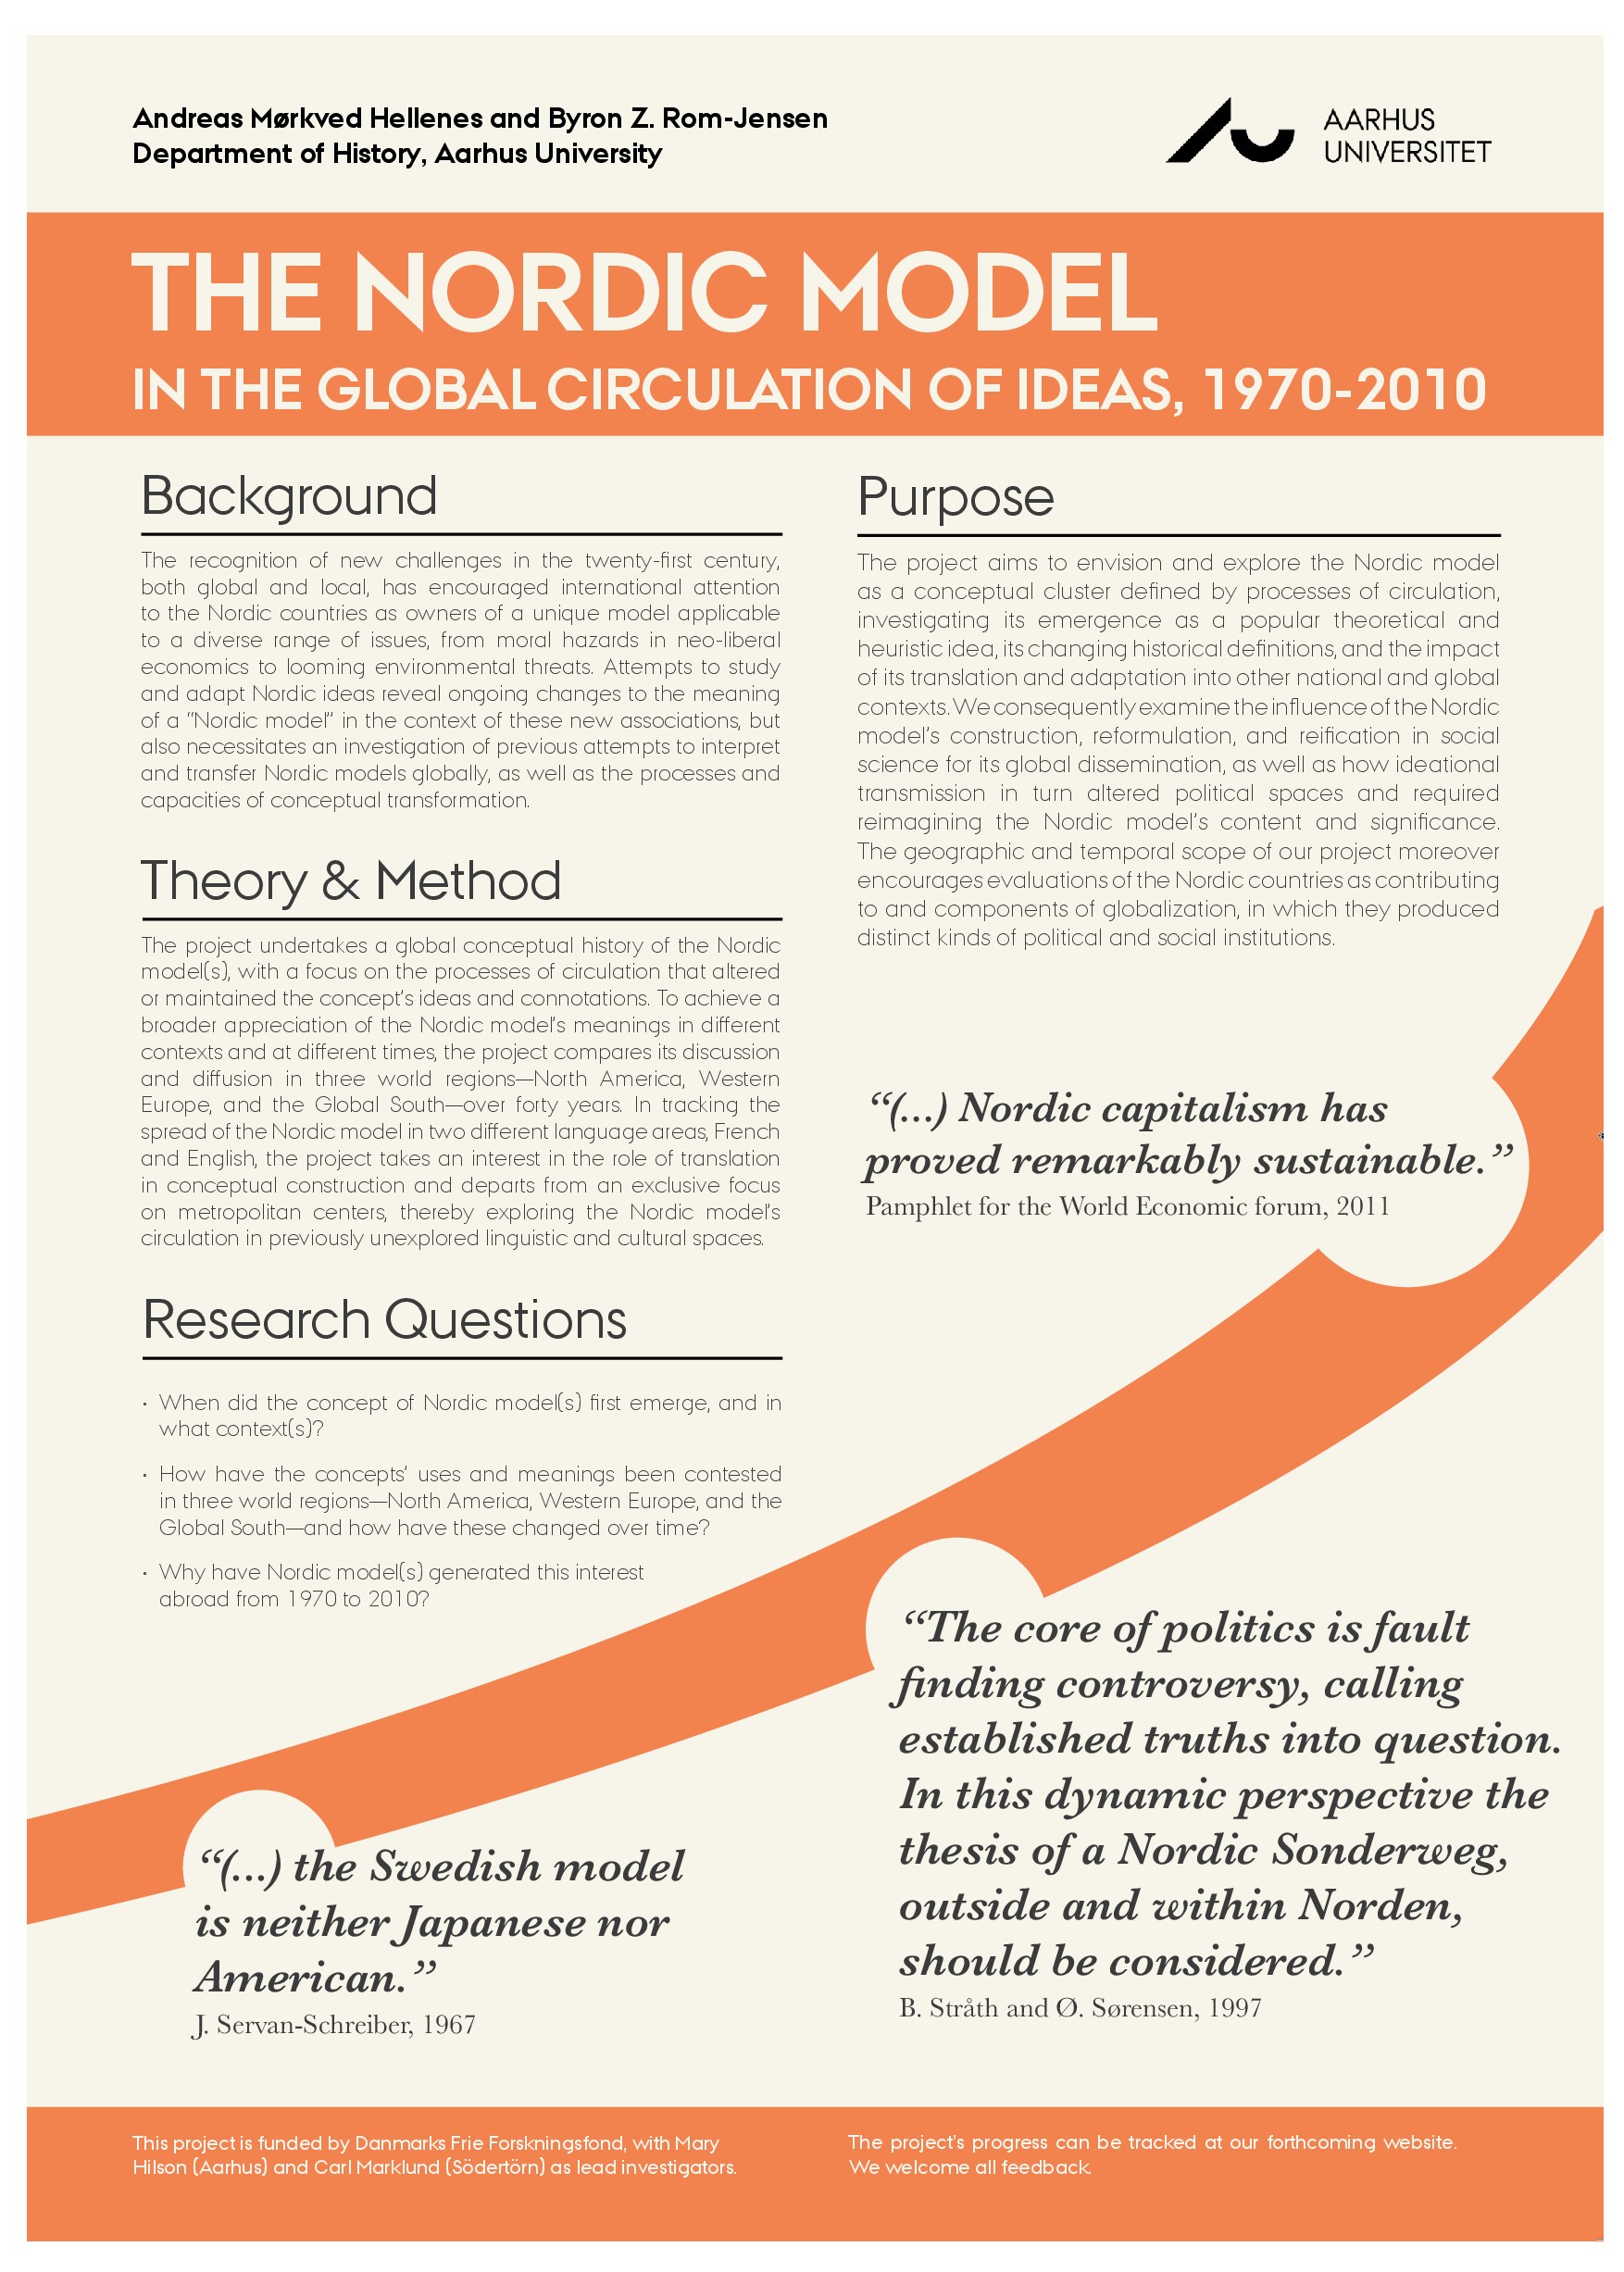 "The Nordic Model in the Global Circulation of Ideas, 1970-2020" poster.